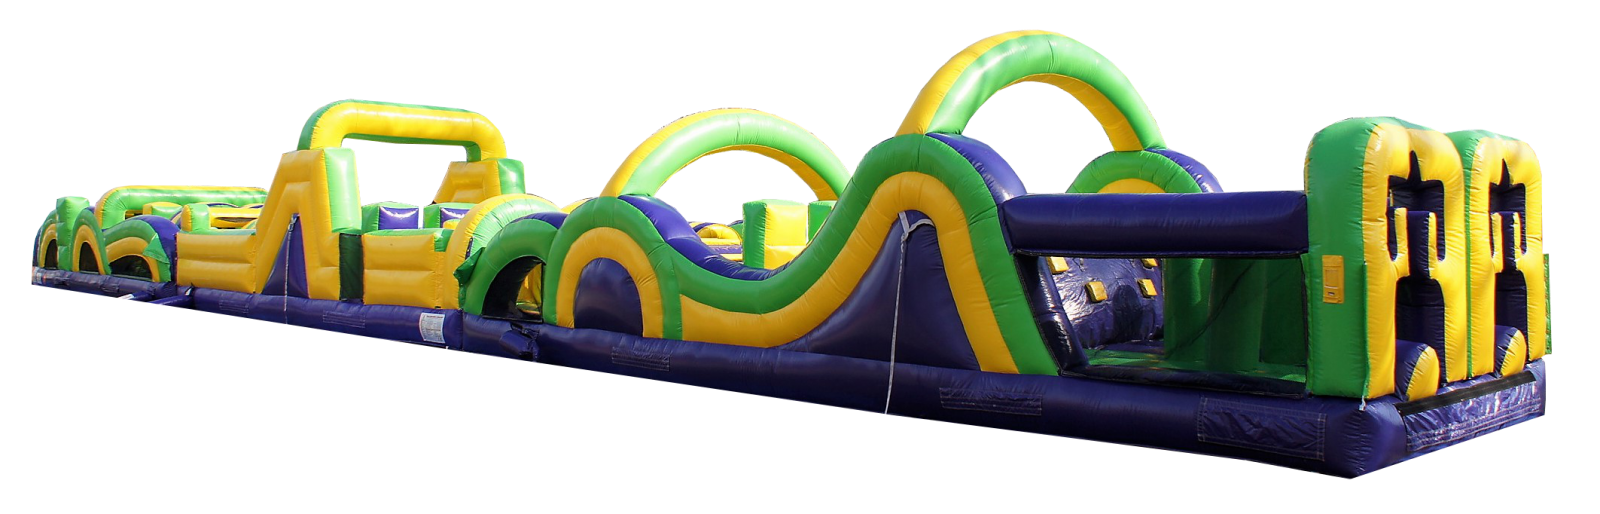 big obstacle course rental Nashville Tn jumping hearts party rentals